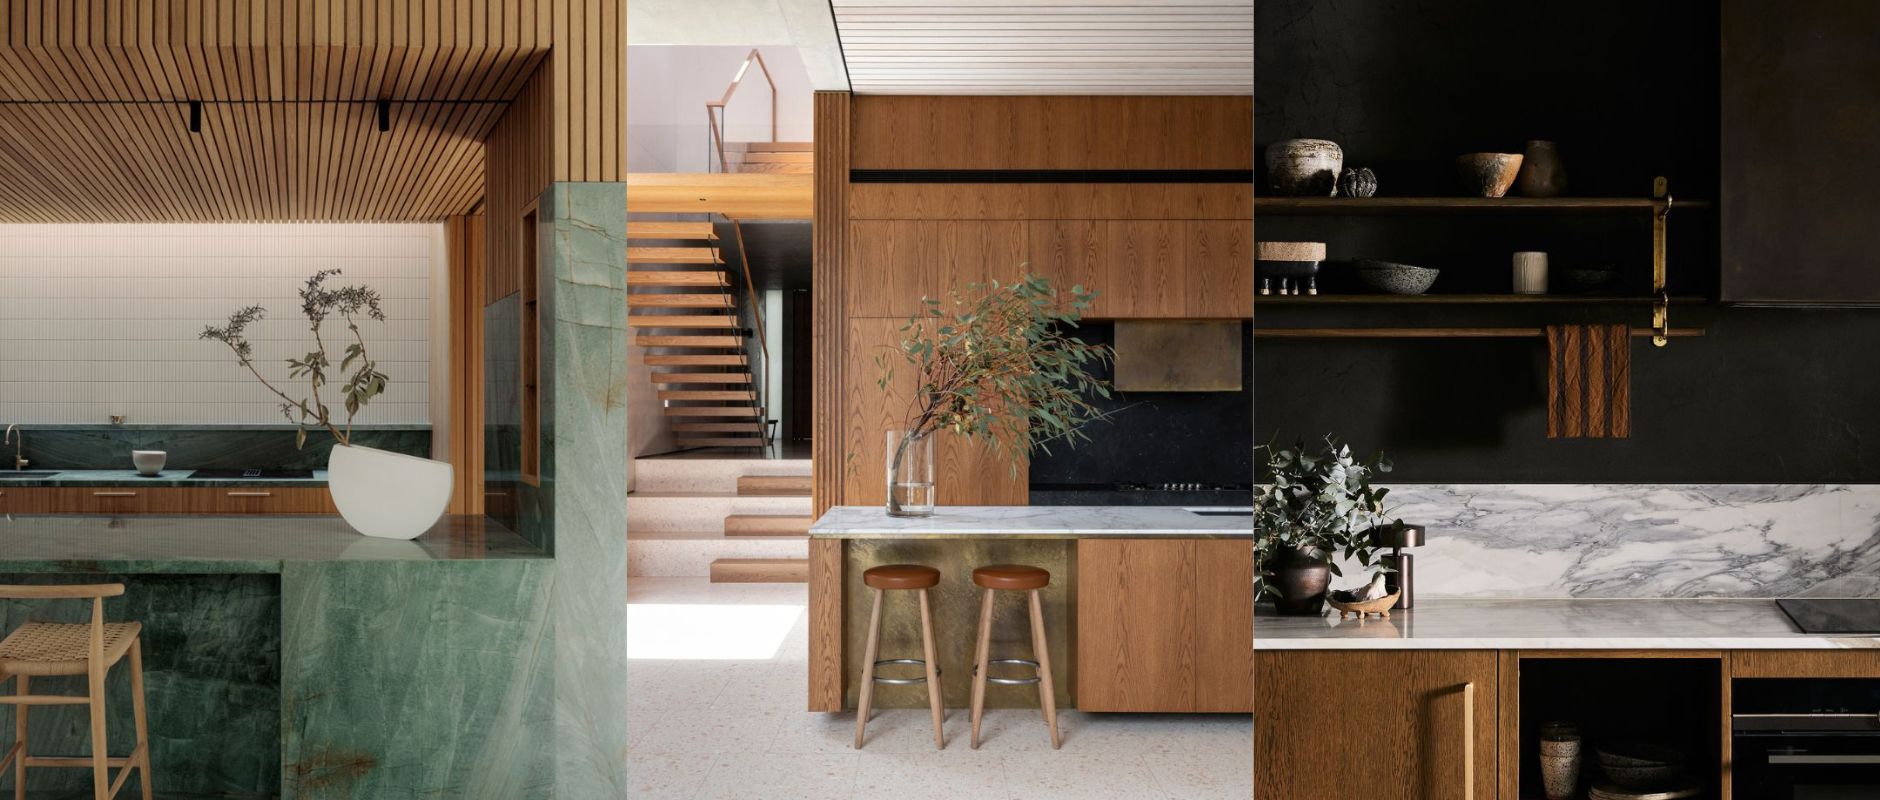 Blog post cover image featuring three interior design and architecture projects; 301 Harcourt St by UME Architecture, Queens Park Road by Porebski Architects, and River Studio by Rebecca Jansma.